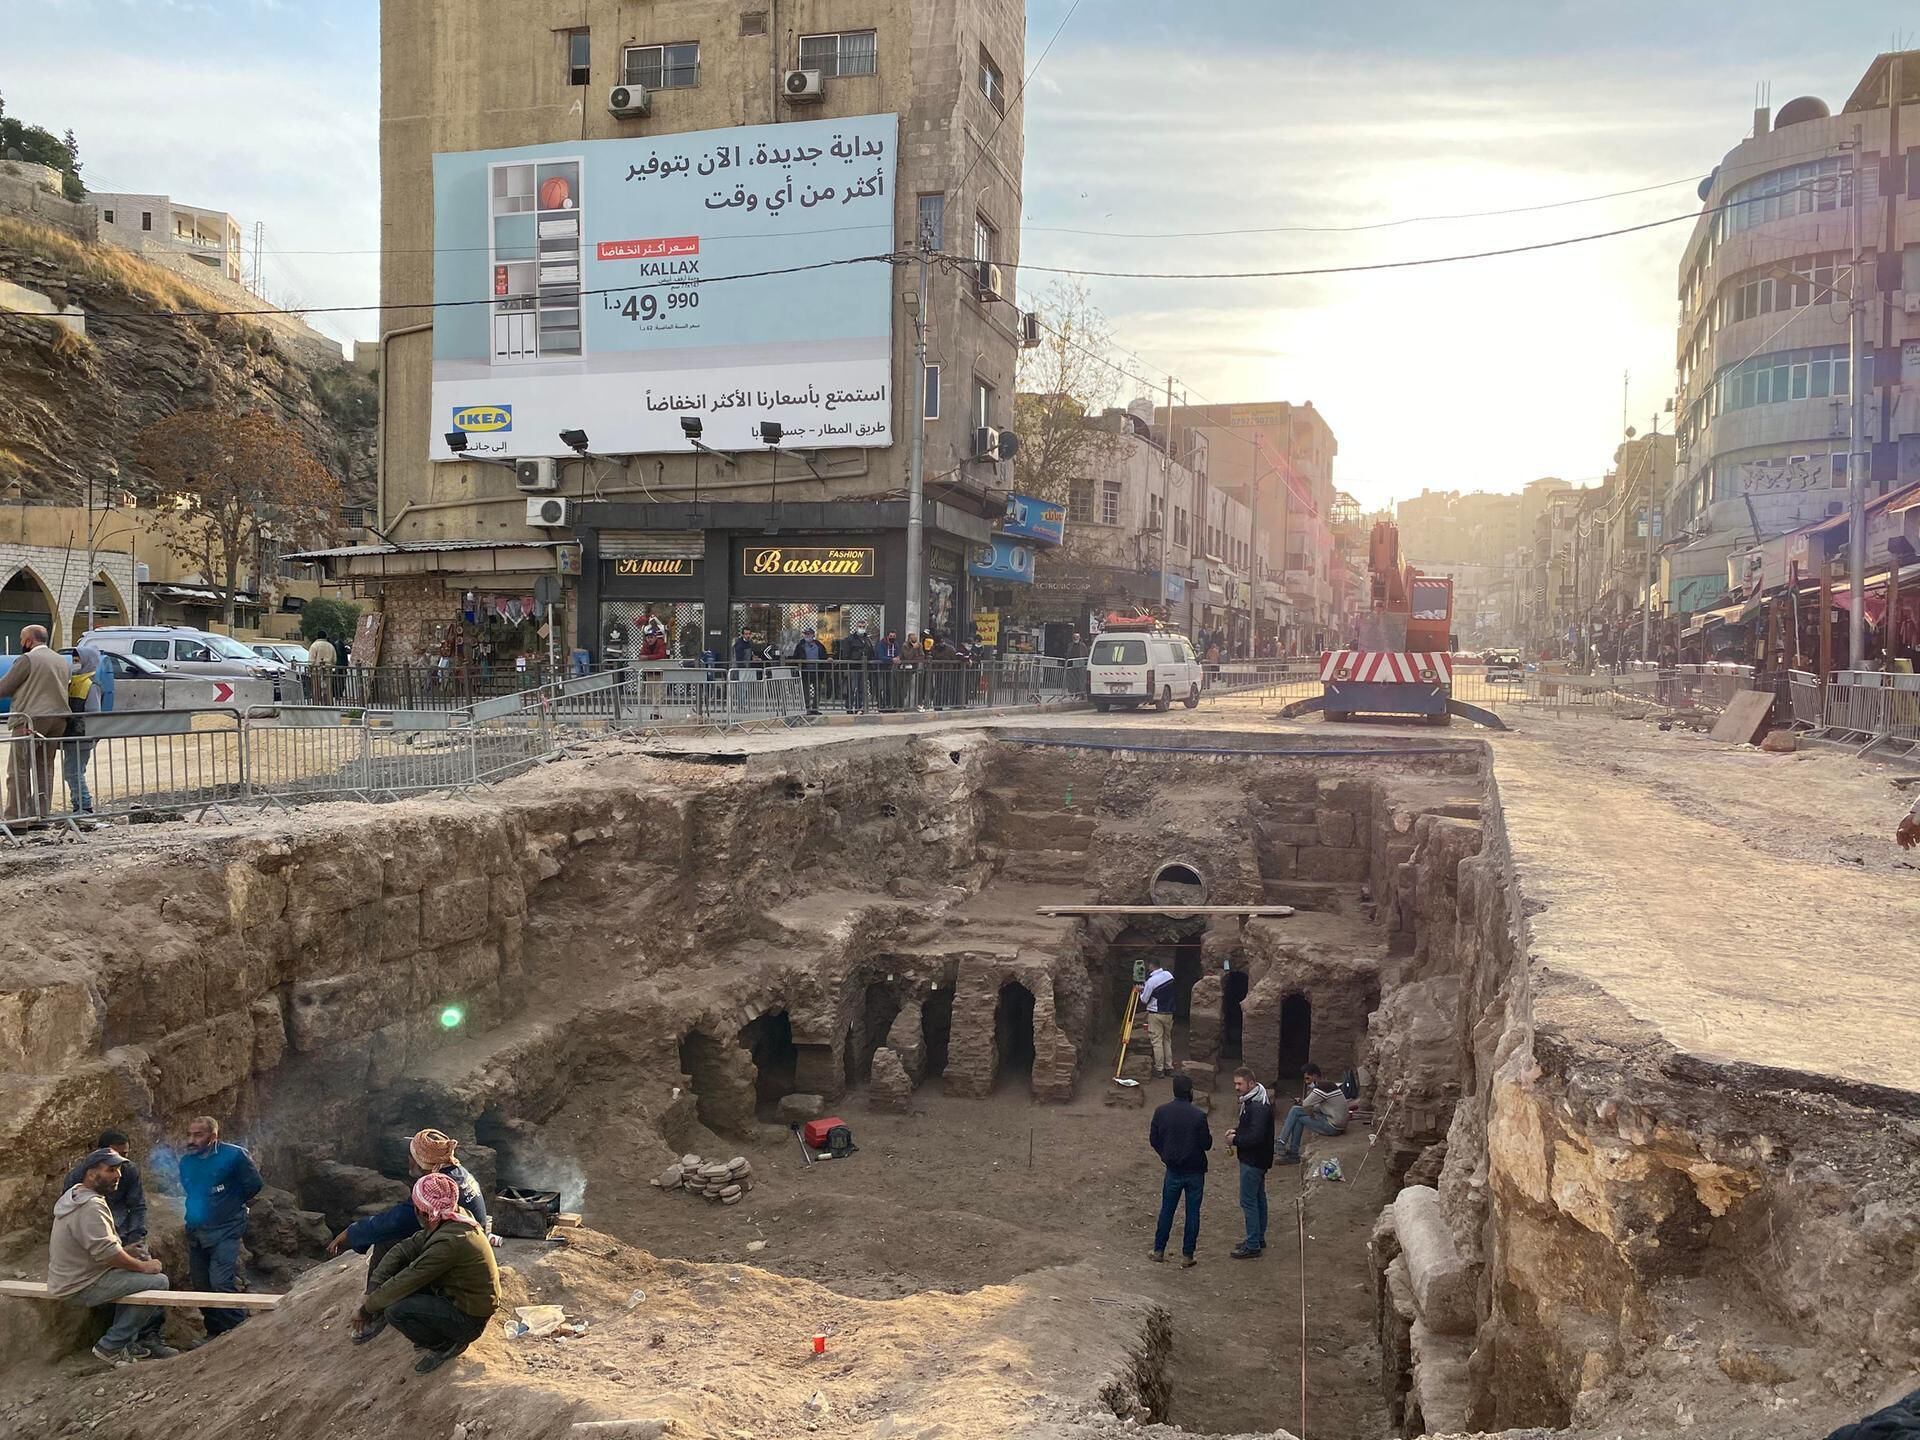 Jordan's newly discovered Roman baths to be covered back up